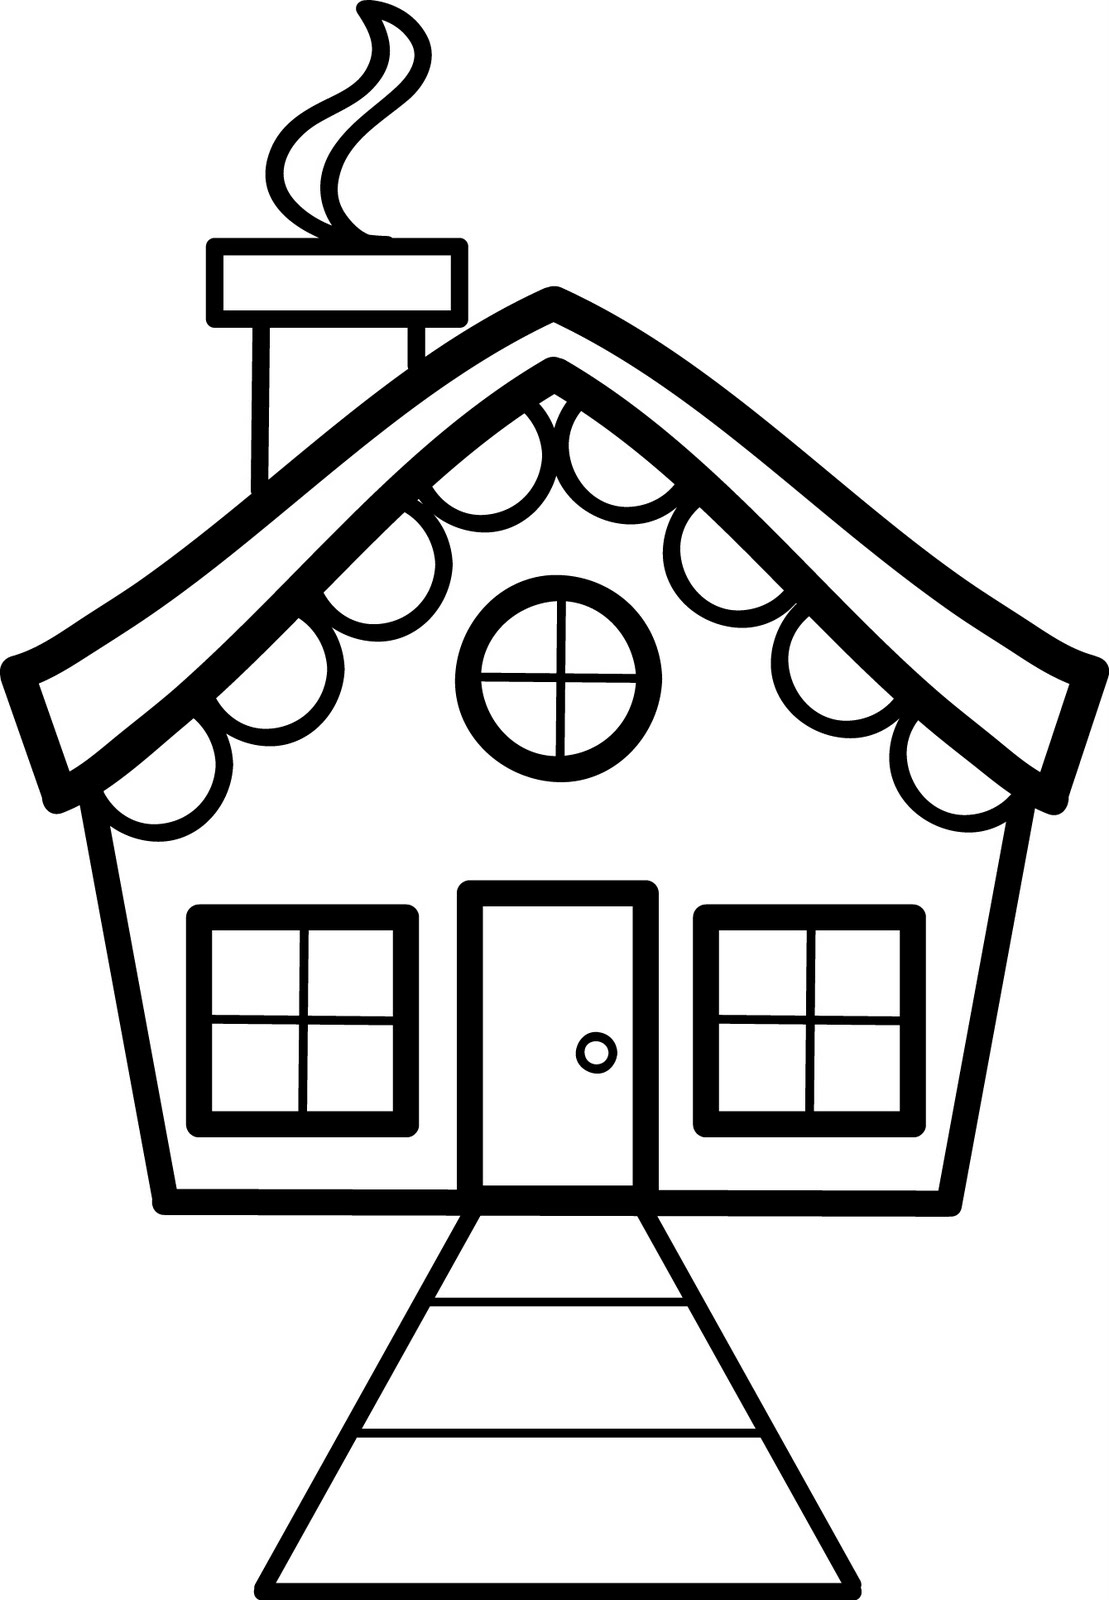 Little House Drawing at GetDrawings.com | Free for ...